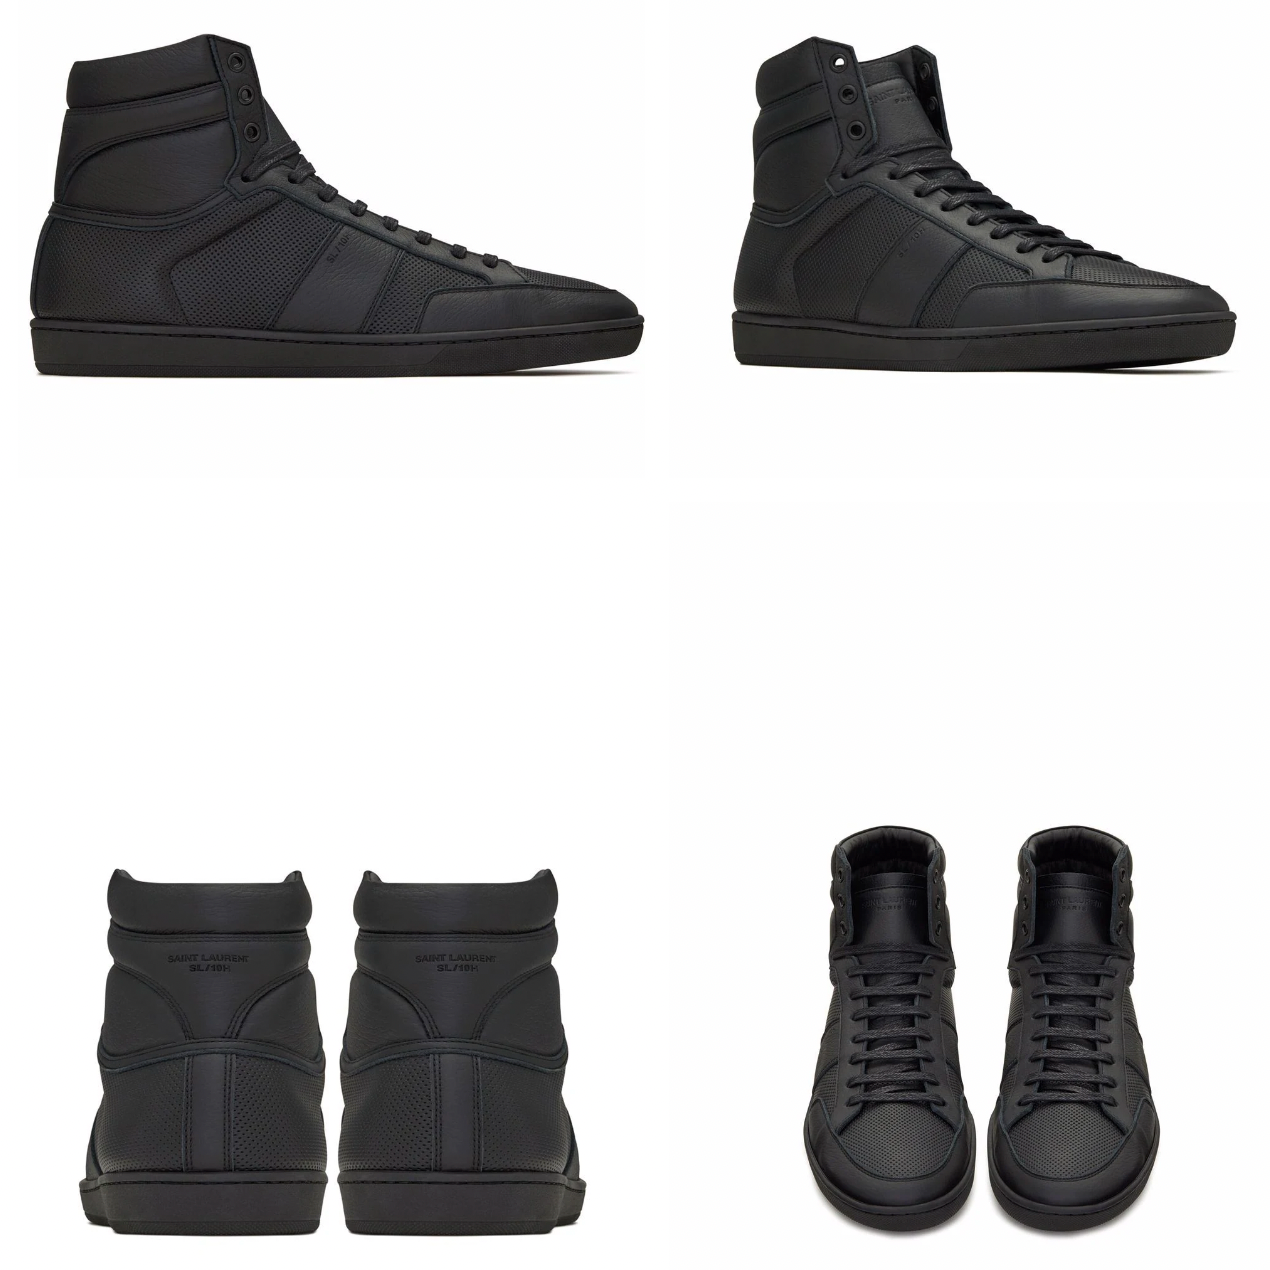 Saint Laurent high-top leather sneakers